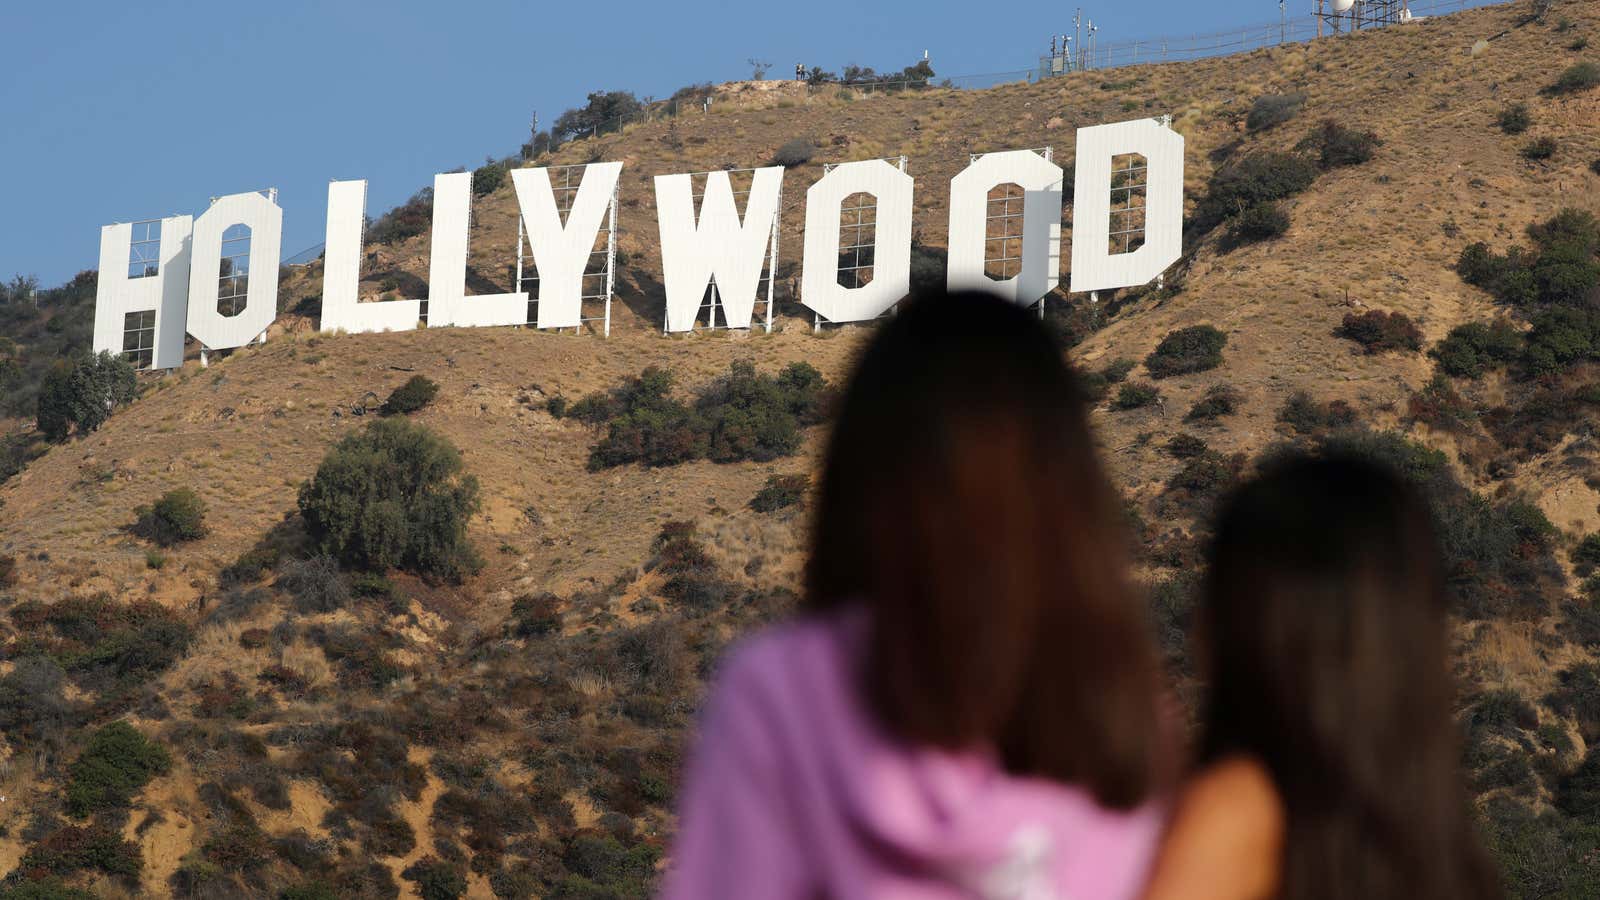 There’s another Hollywood, and it has problems, too.